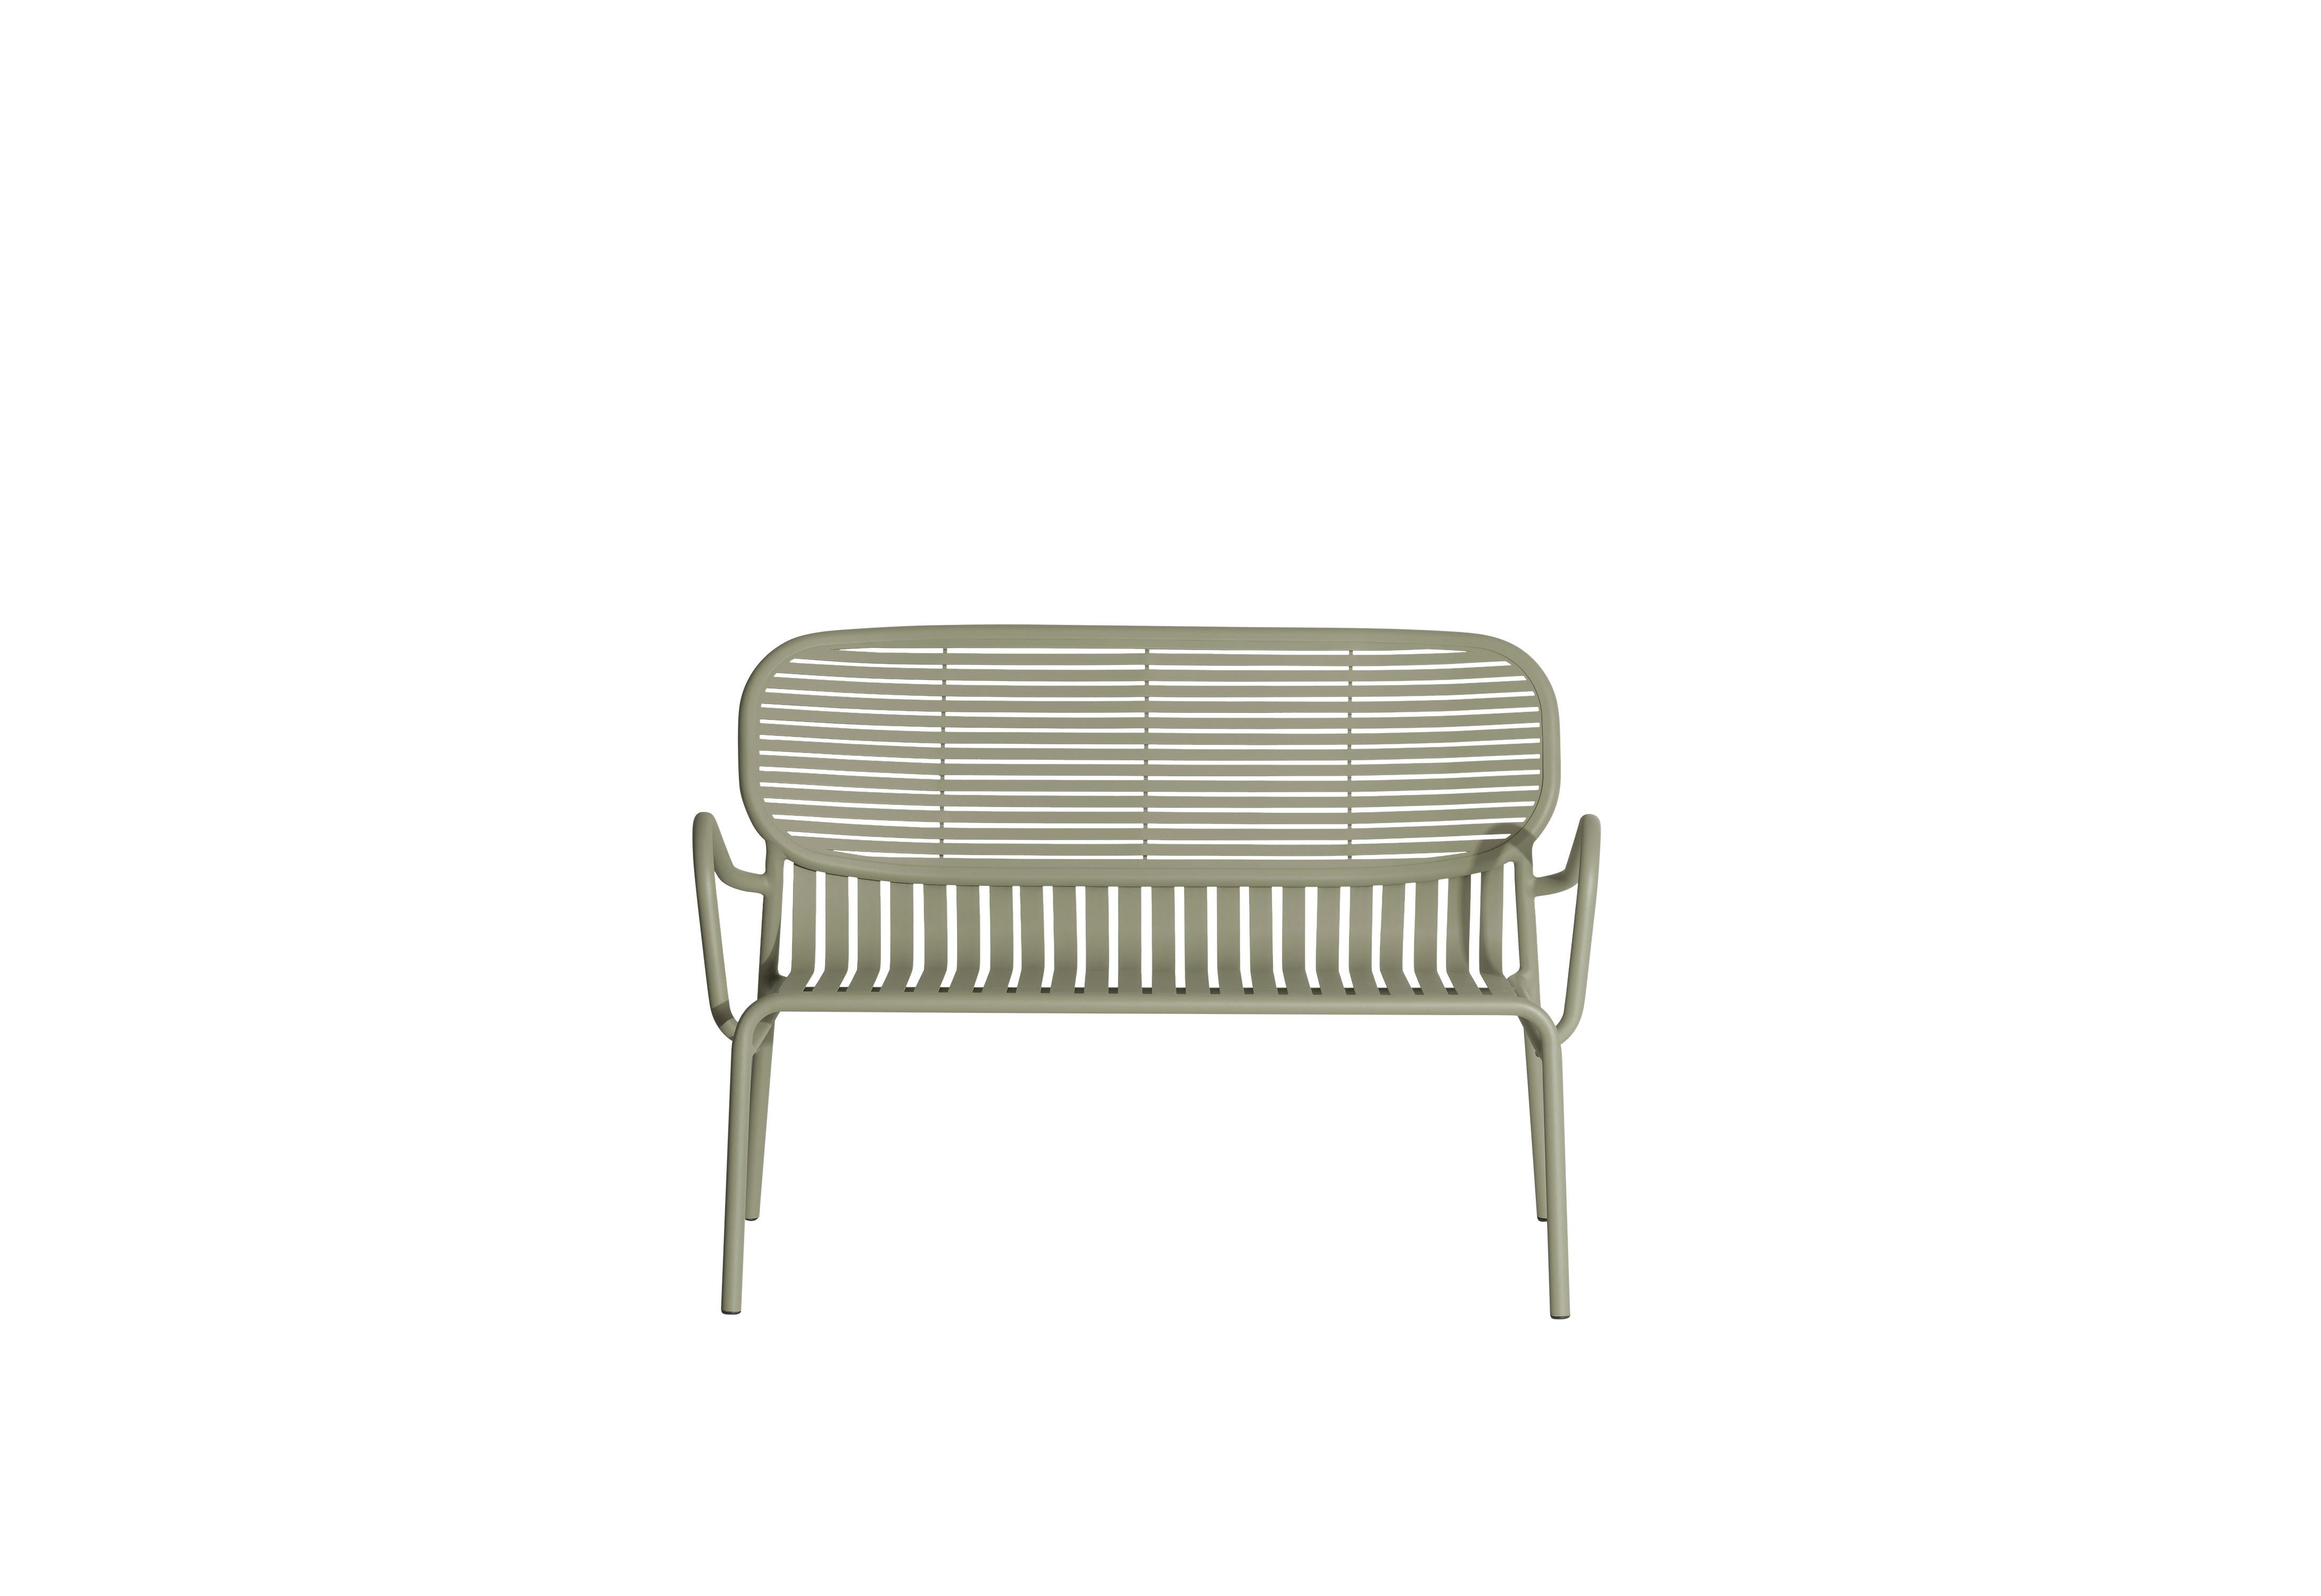 Petite Friture Week-End Sofa in Jade Green Aluminium by Studio BrichetZiegler, 2017

The week-end collection is a full range of outdoor furniture, in aluminium grained epoxy paint, matt finish, that includes 18 functions and 8 colours for the